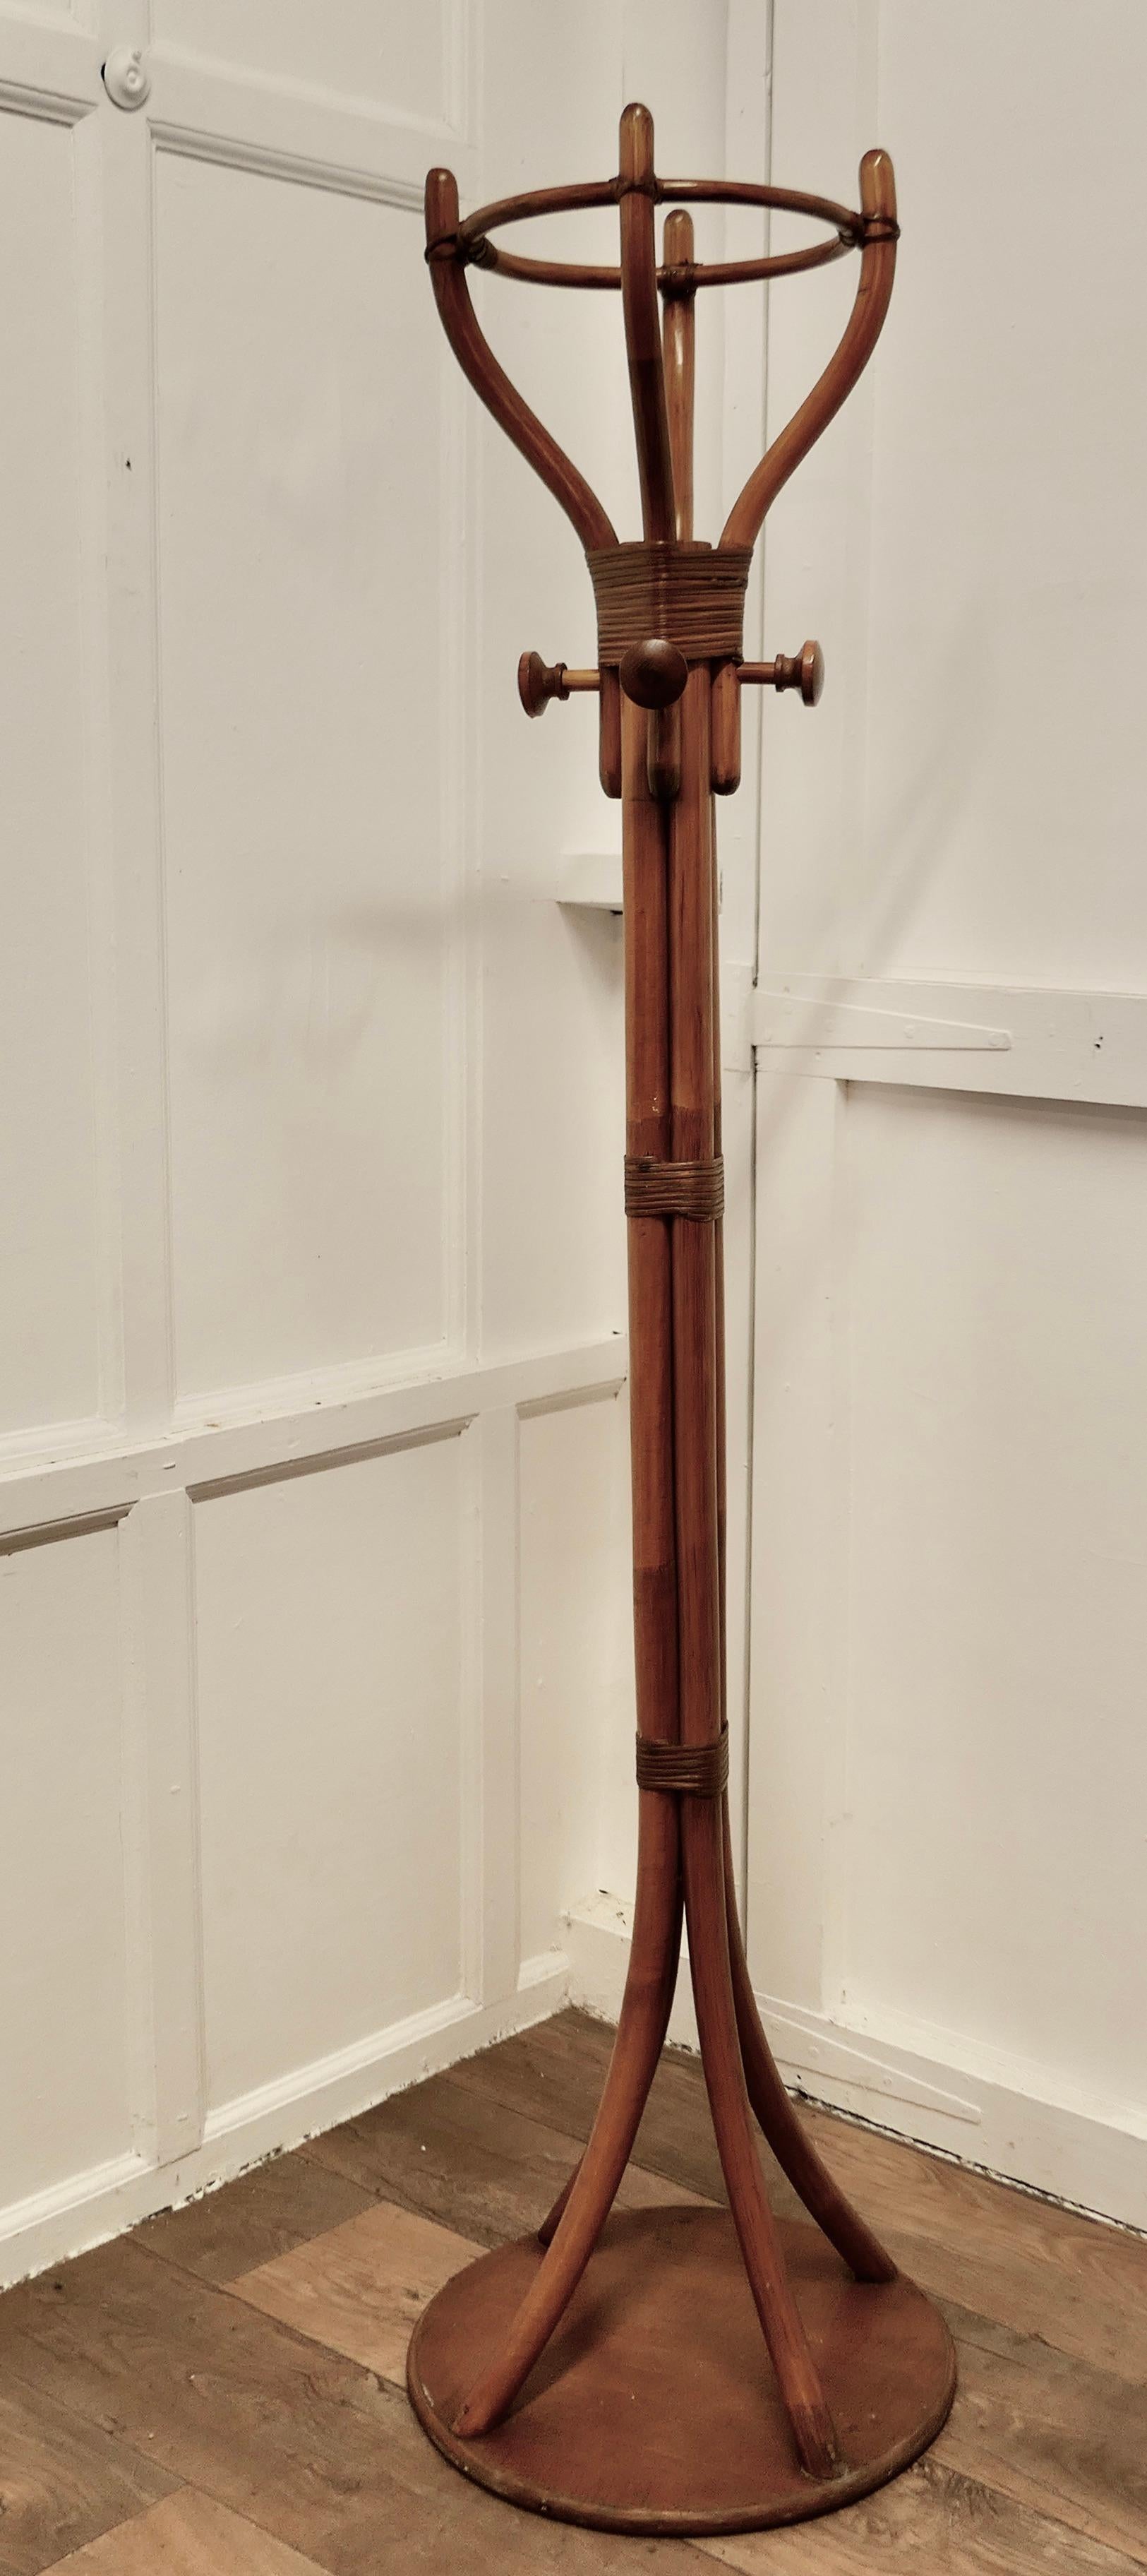 A Mid Century Bent Wood Hall Stand

This is an Unusual Large Hat & Coat Hall Stand, it has 4 upward curving legs which form hat pegs at the top and there are also 4 round coat pegs, all set on a sturdy round base
The Hall Stand is in Good Condition